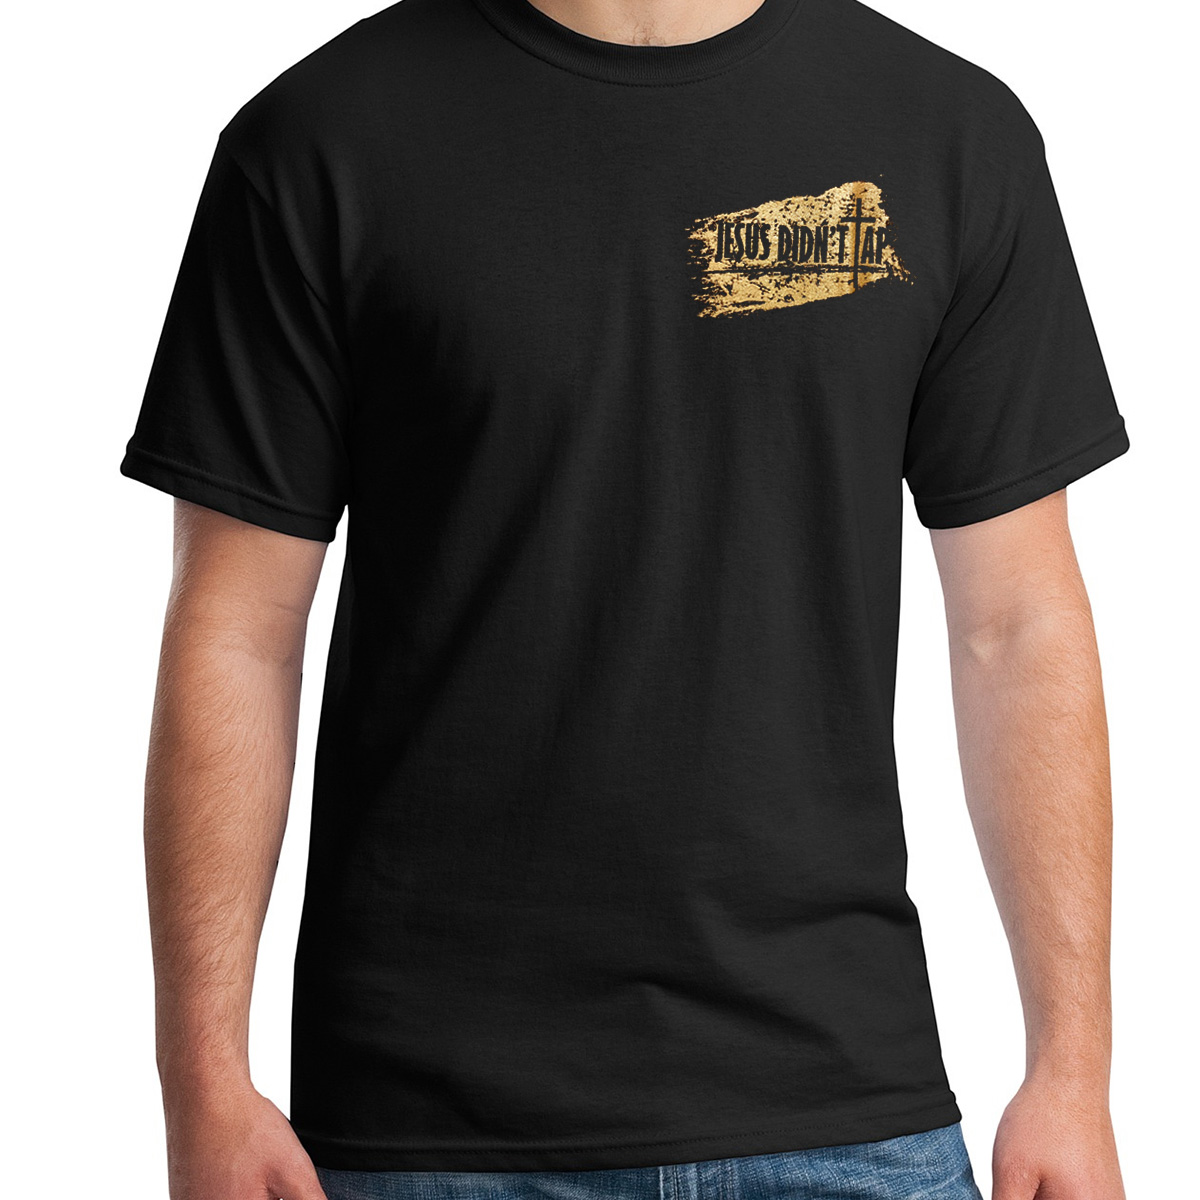 Fighters of Faith Shirt - Jesus Didn't Tap